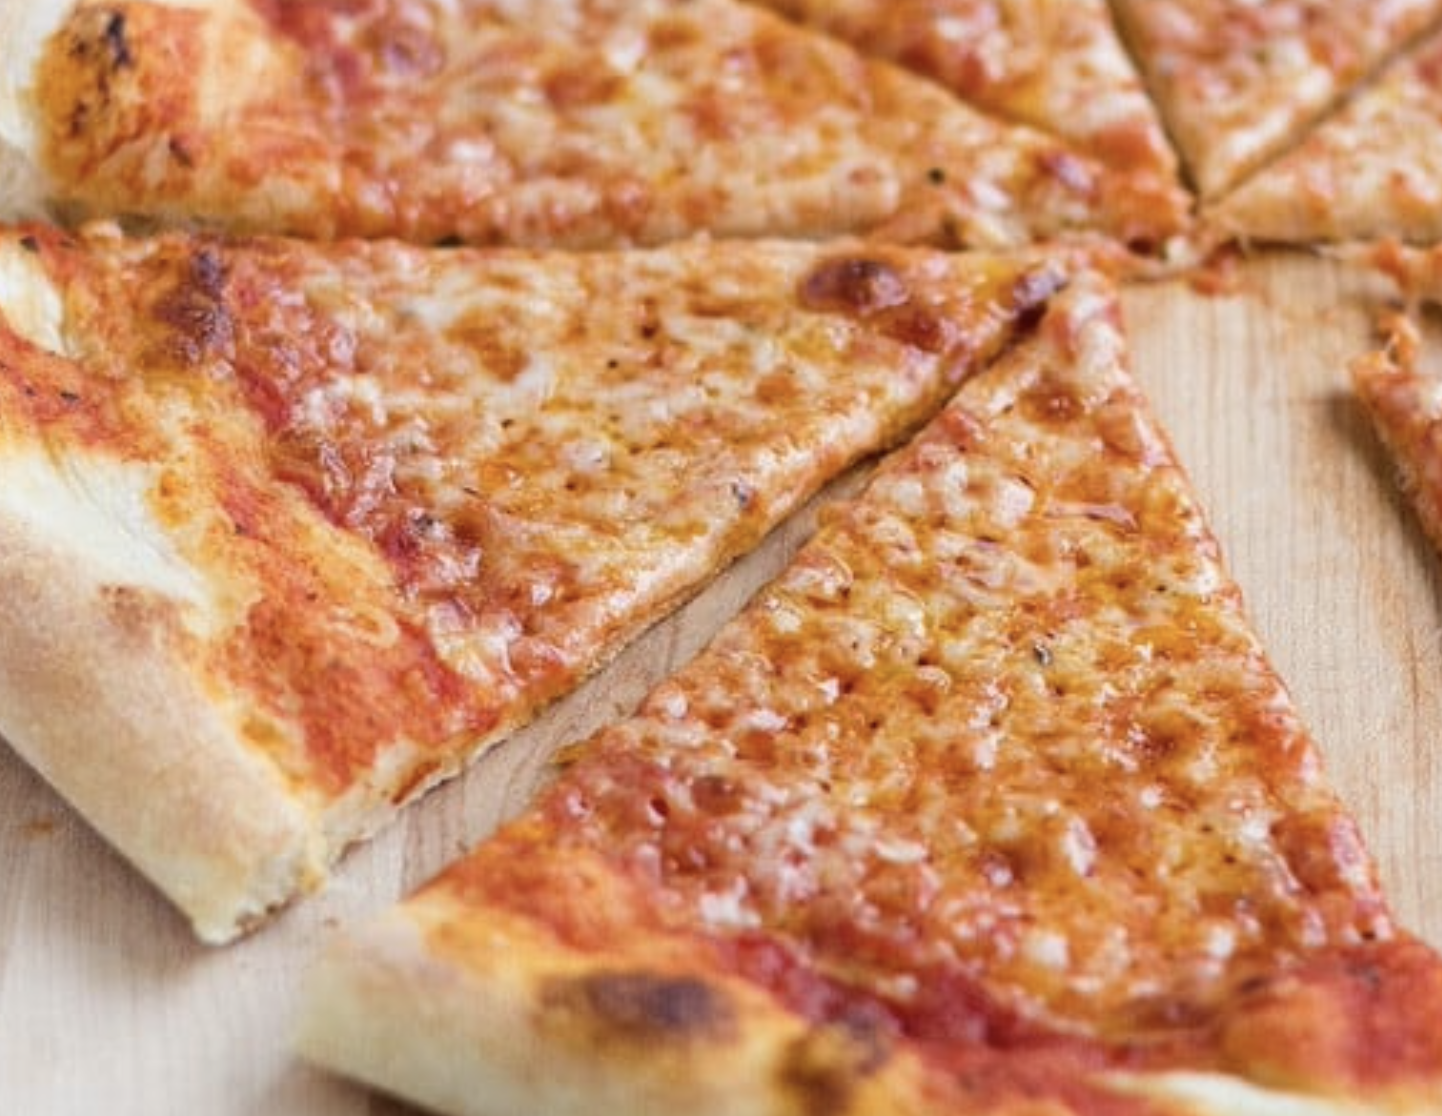 Papa Murphy's Crowned Top Pizza Chain for “Overall Trust